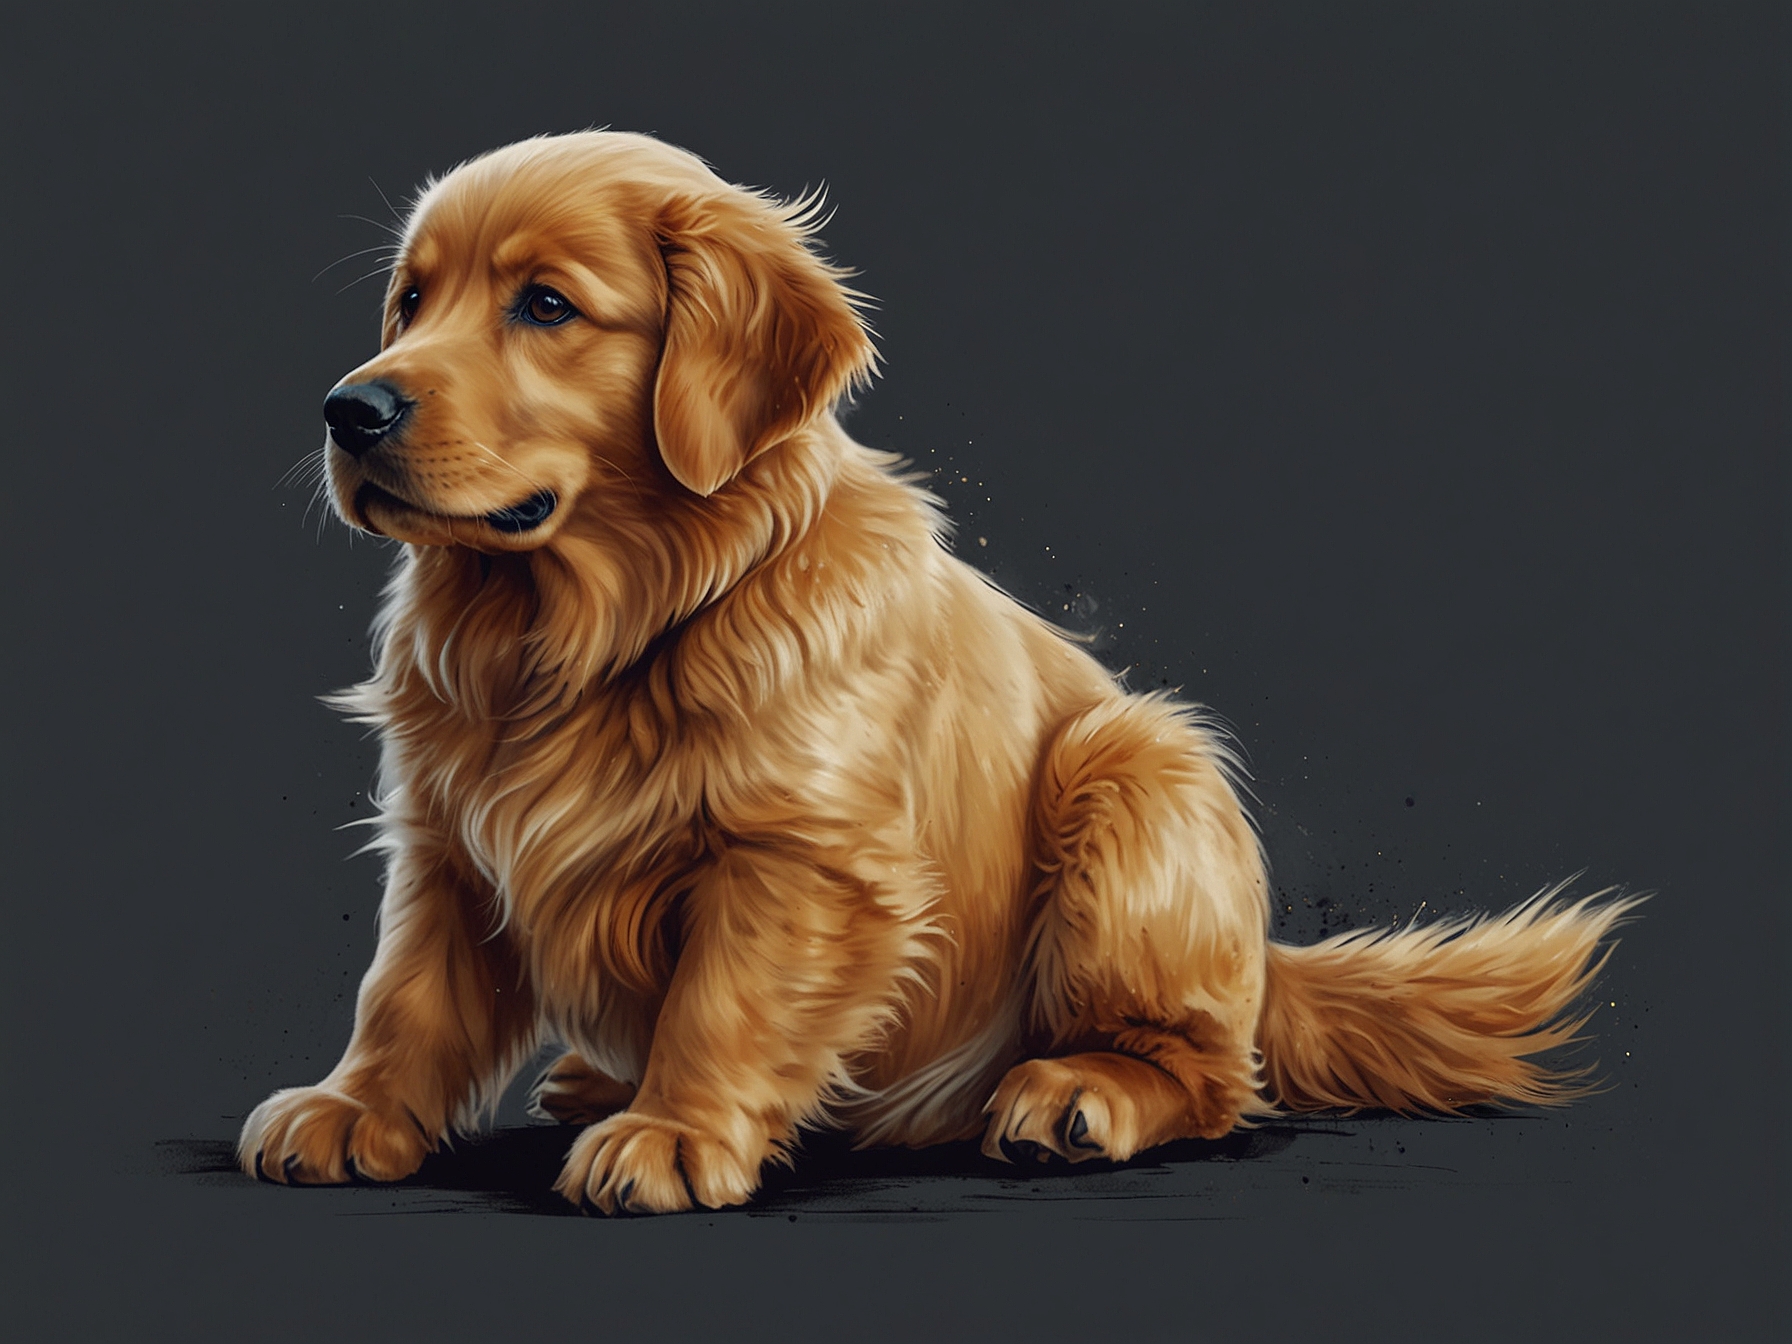 A Golden Retriever puppy growing rapidly within the first year, showcasing its impressive transformation.